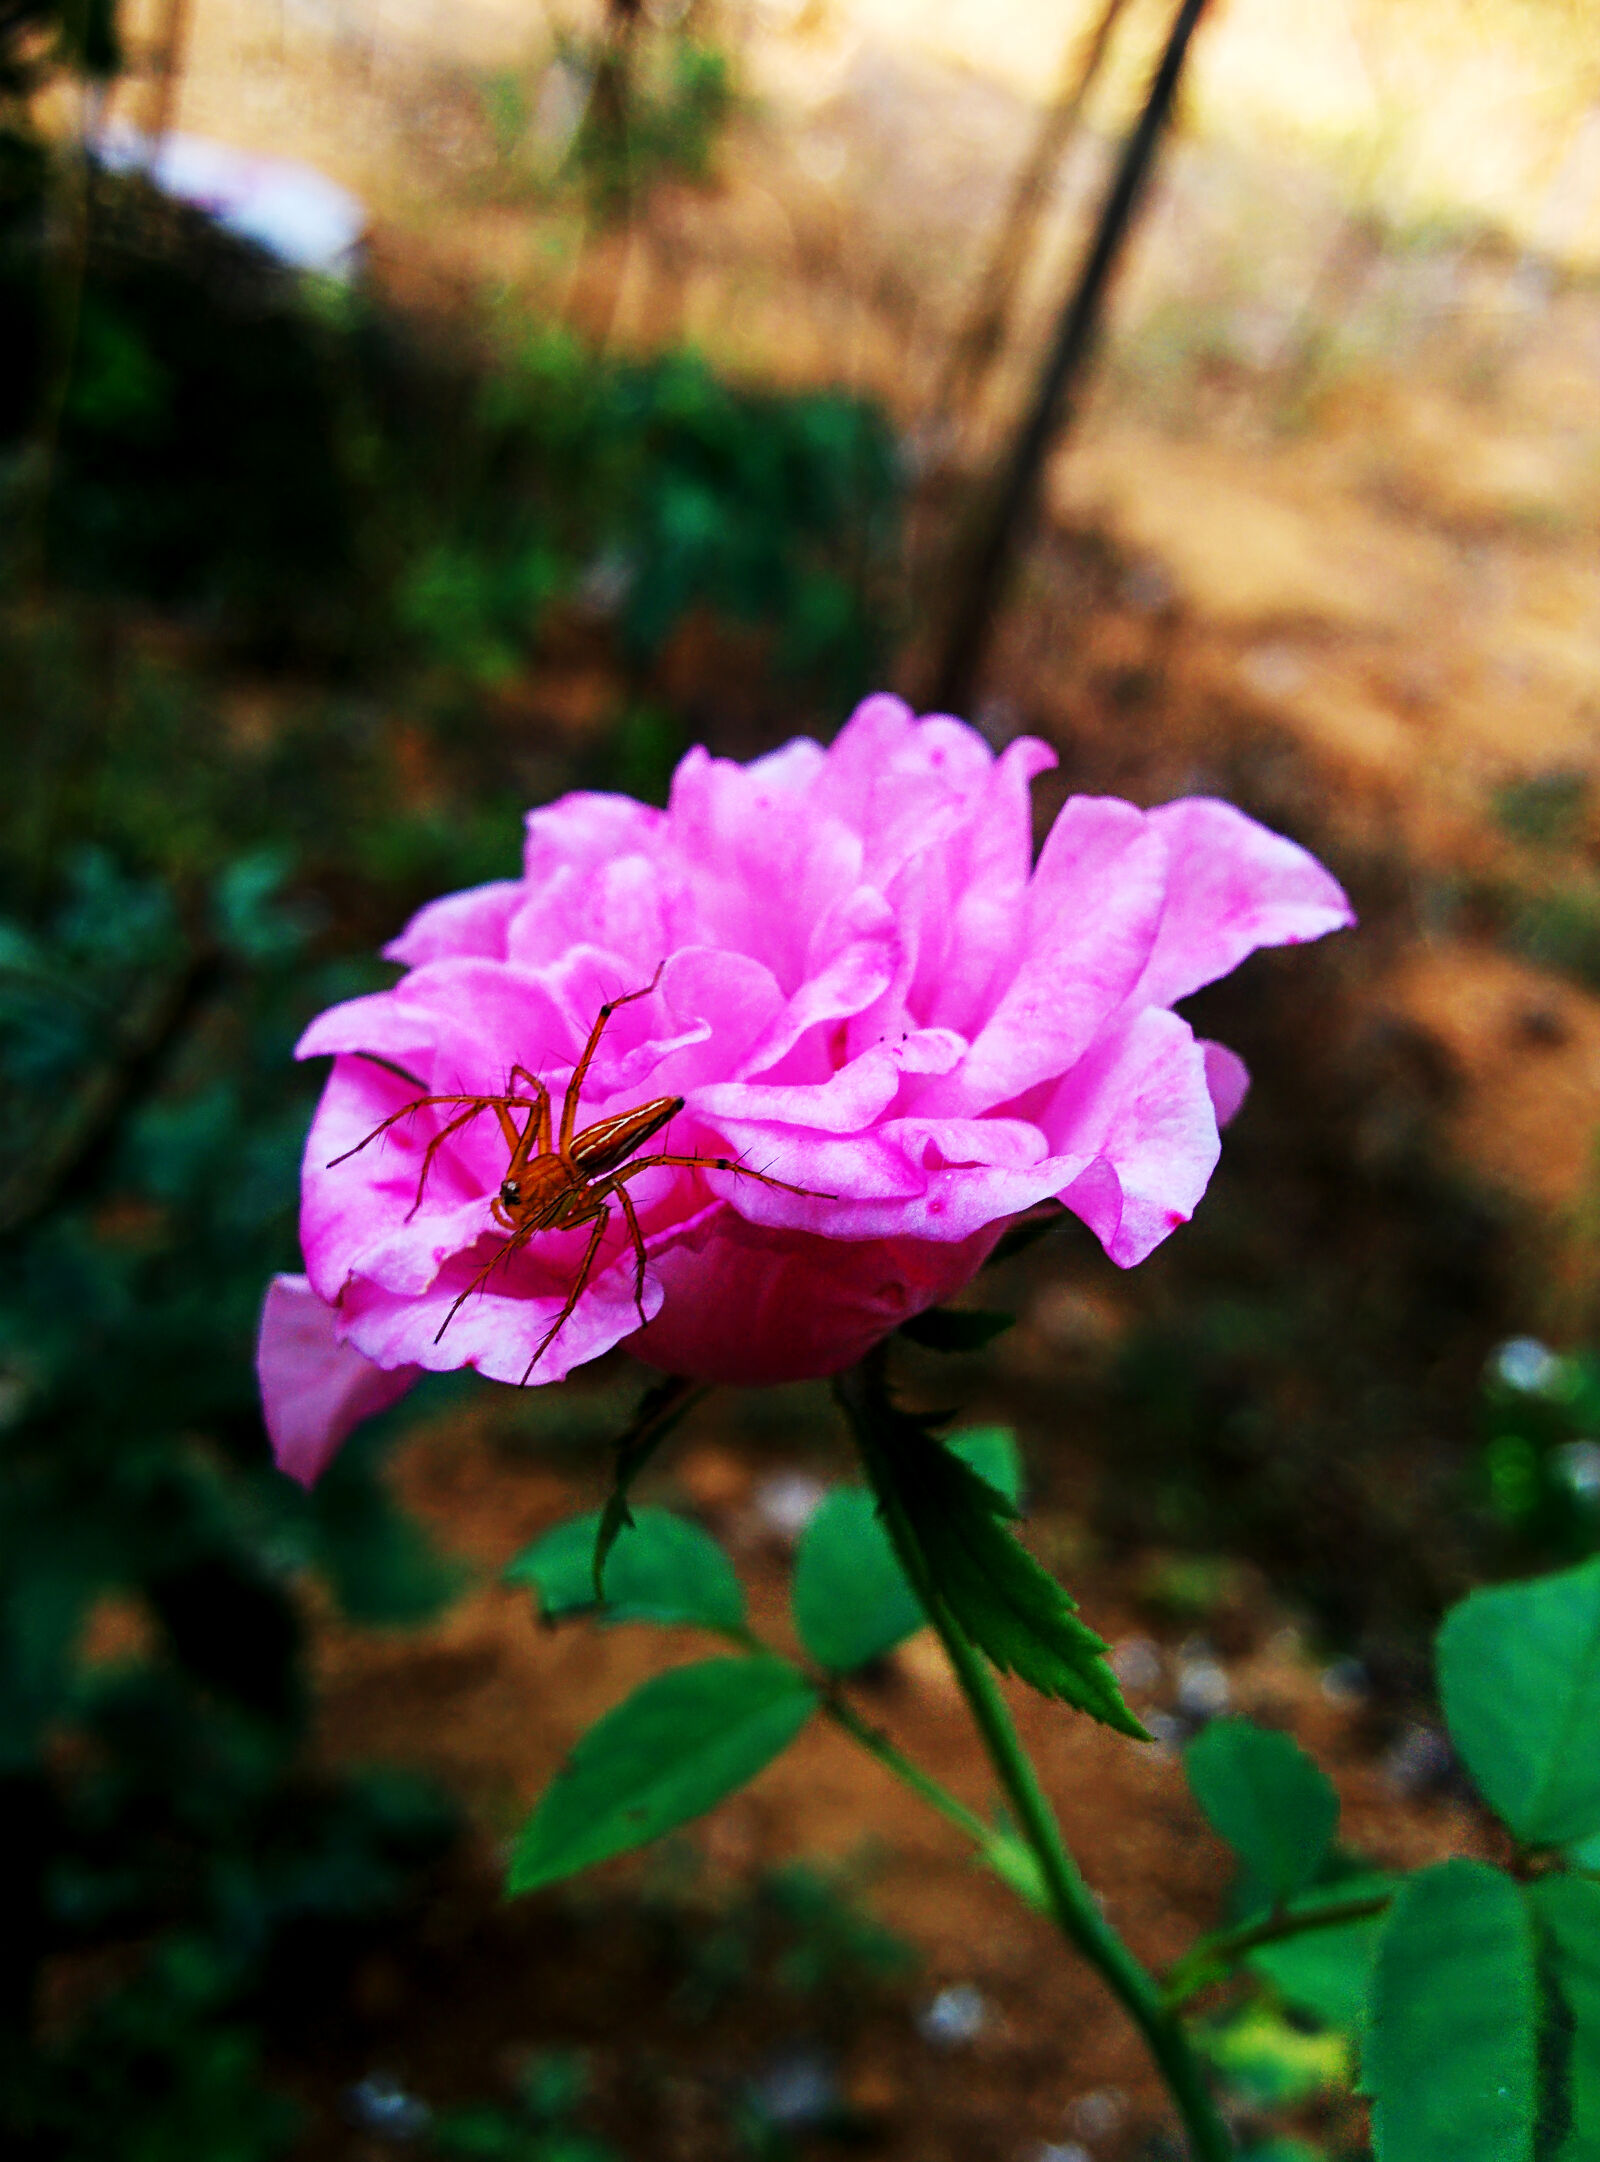 LG Nexus 5 sample photo. Collection, dragonflies, earth, flower photography